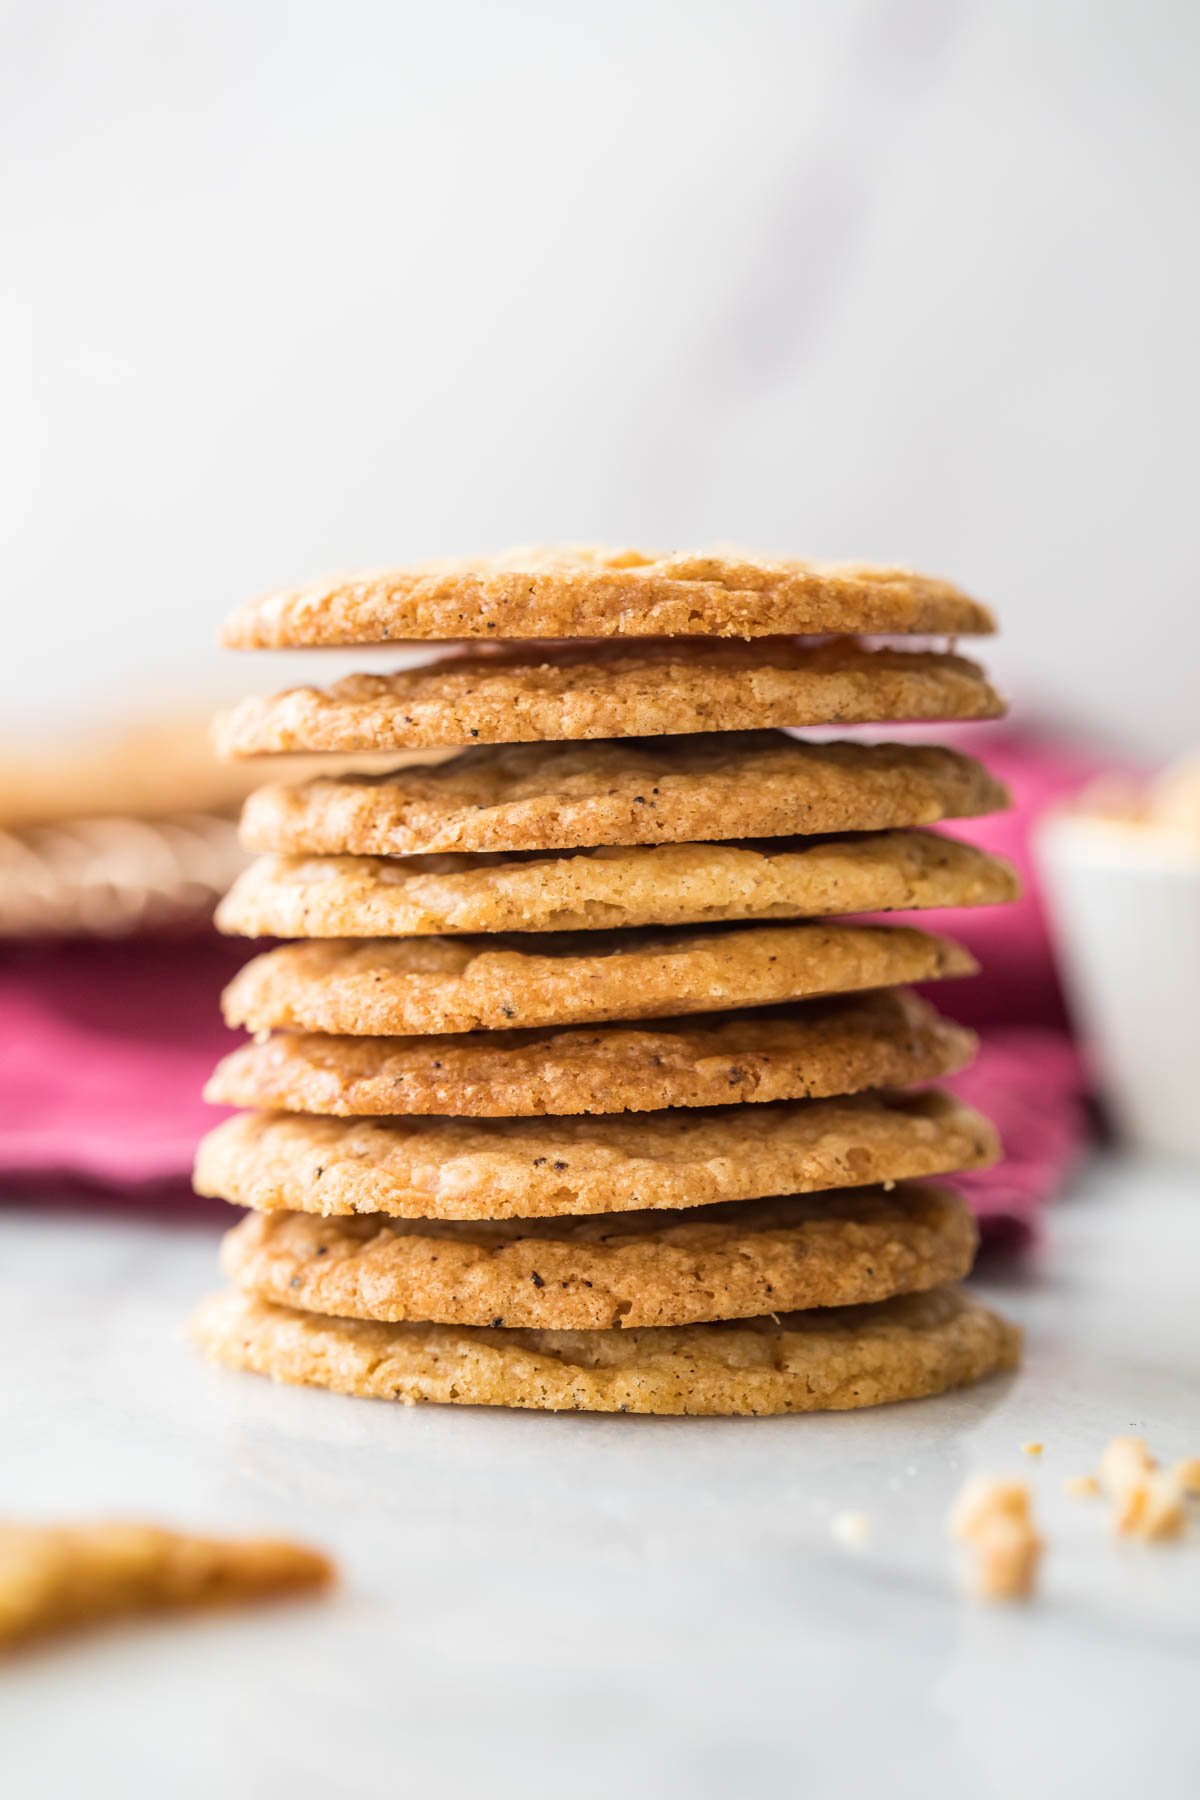 Butter crunch cookies stacked to show how thin and crisp they are.